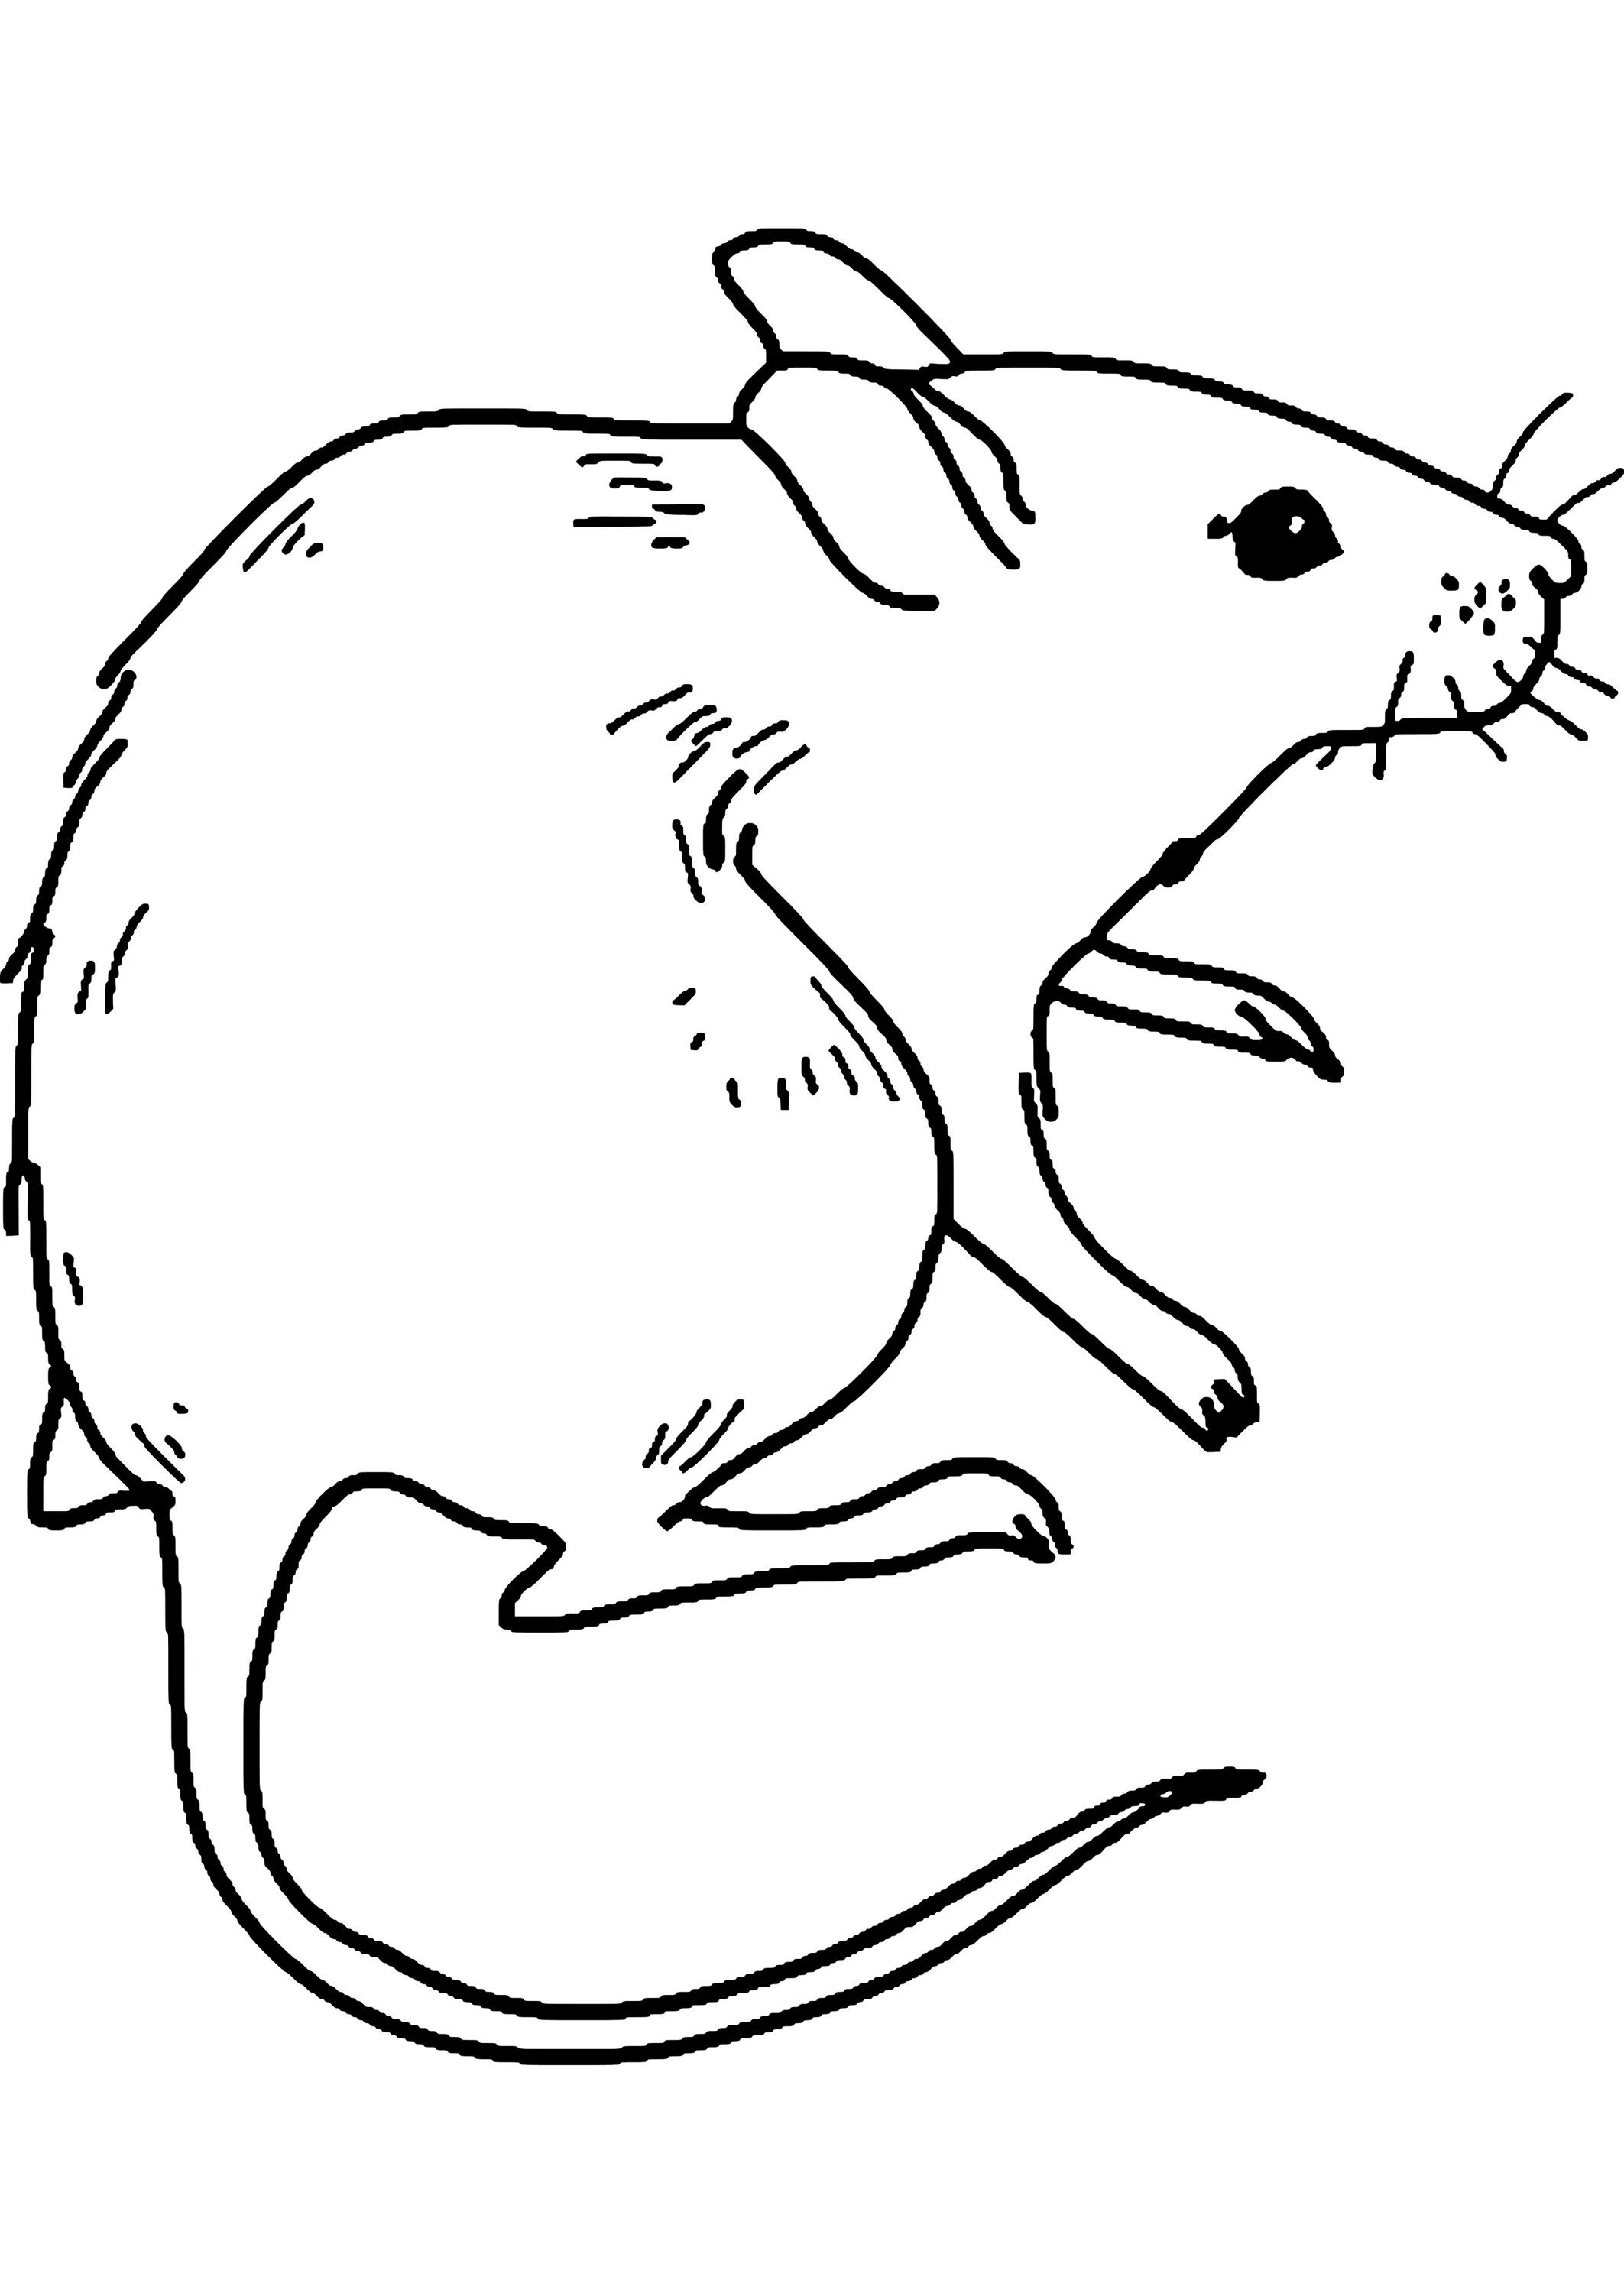 Fancy drawing of a mouse